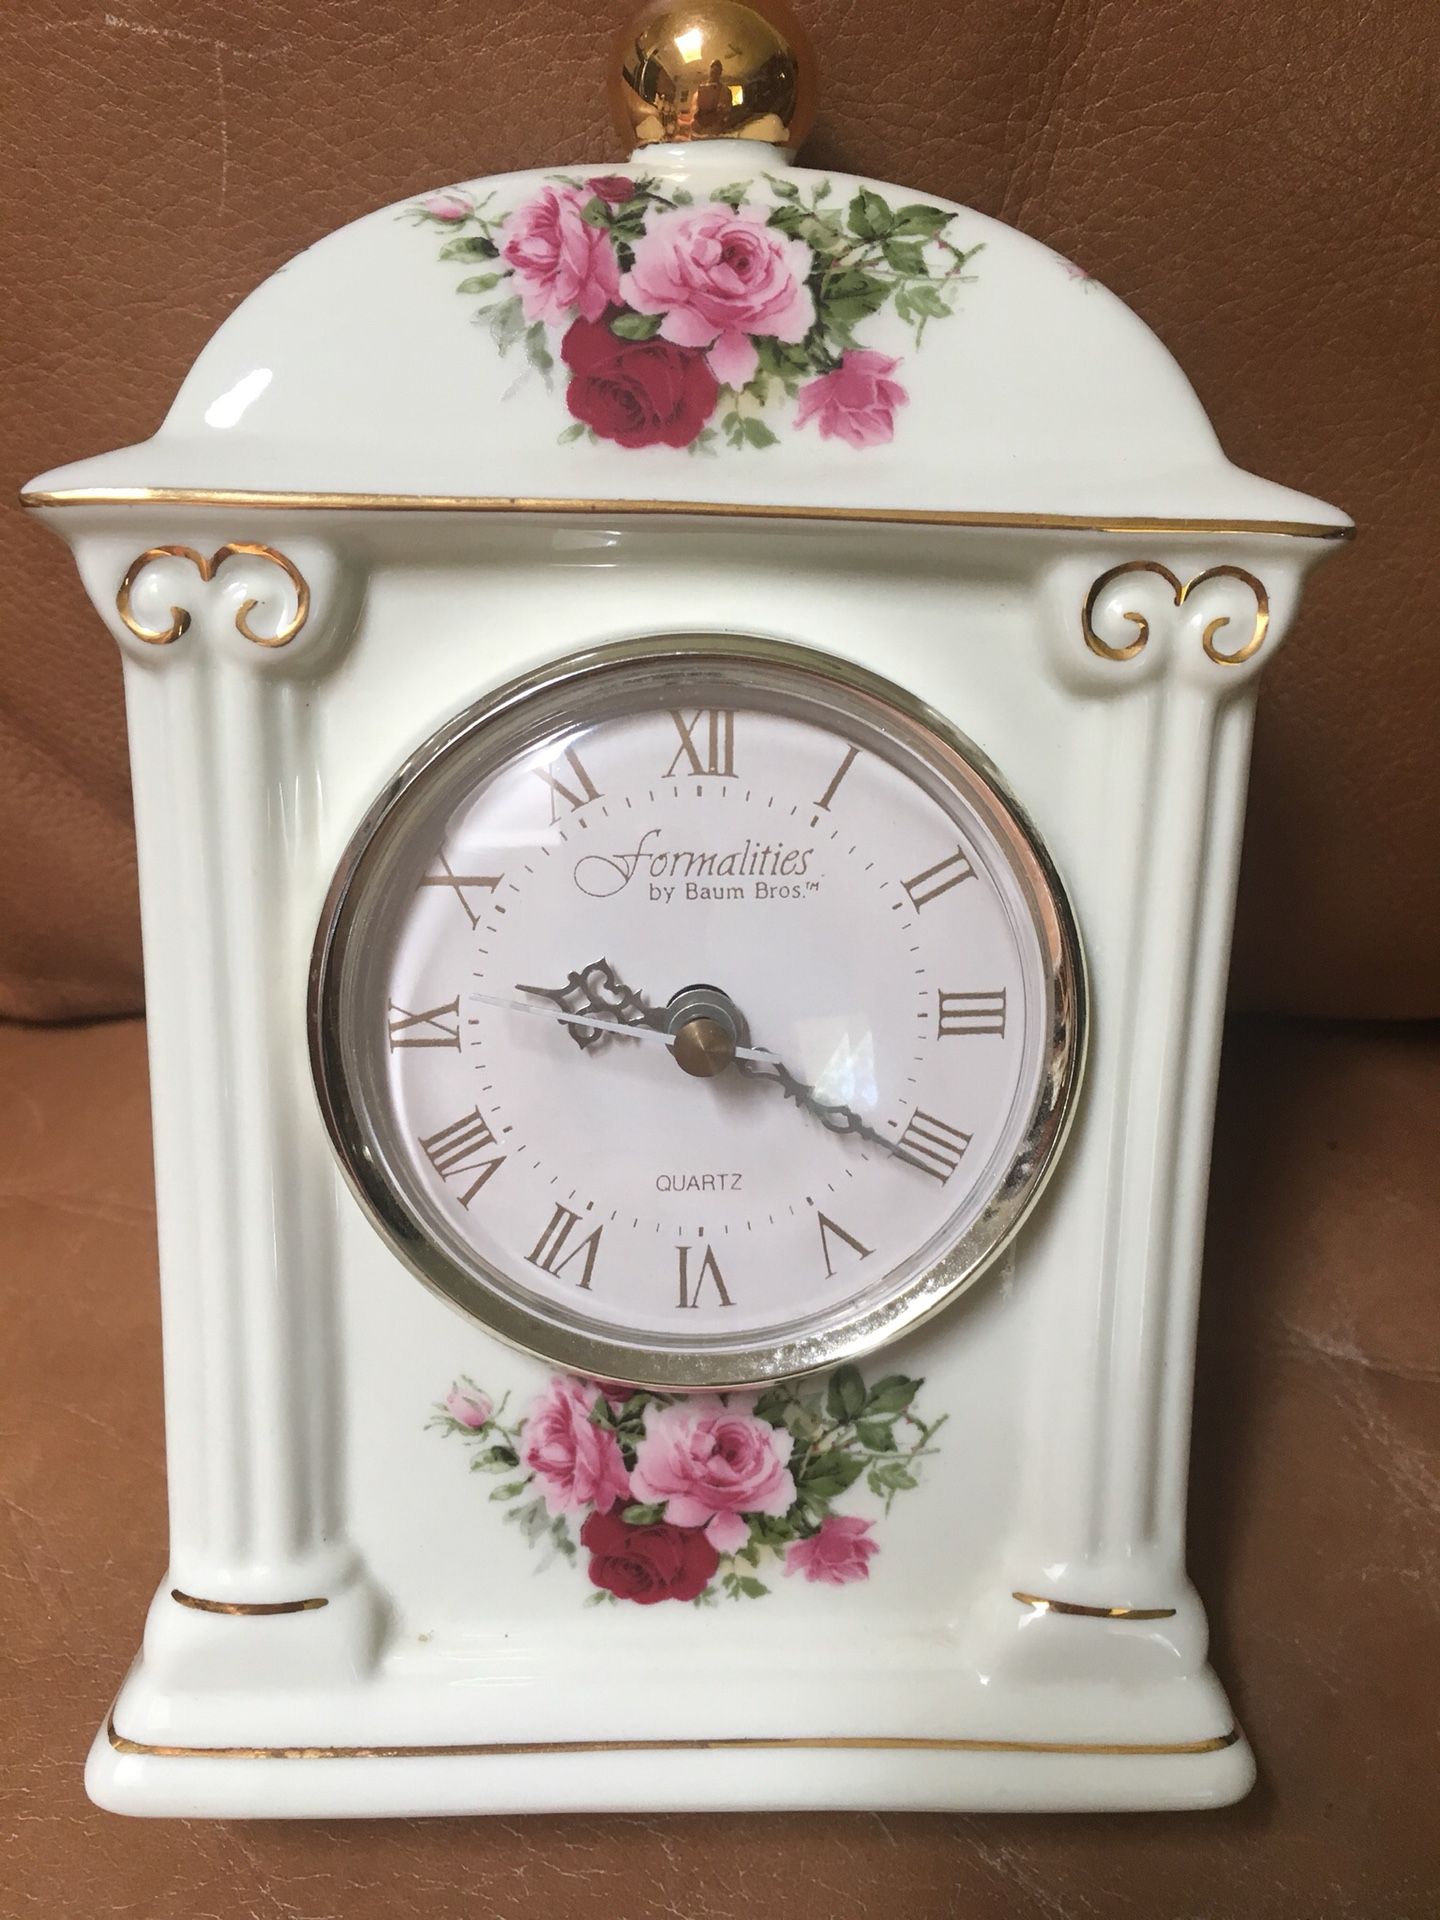 New Formalities- Baum Brothers- 8 inch China mantel clock